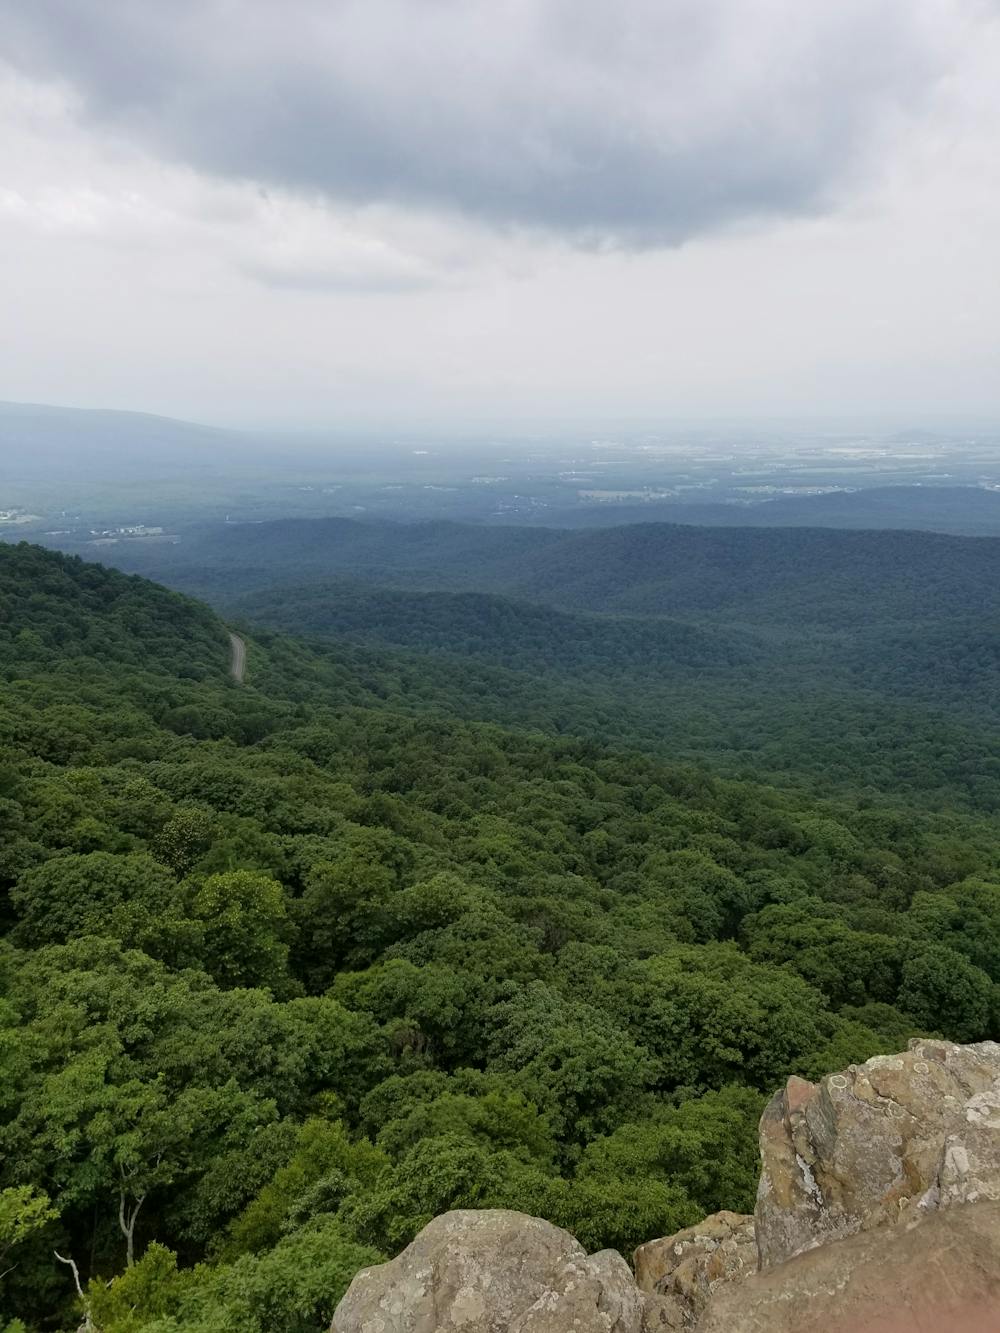 View from Humpback Rocks